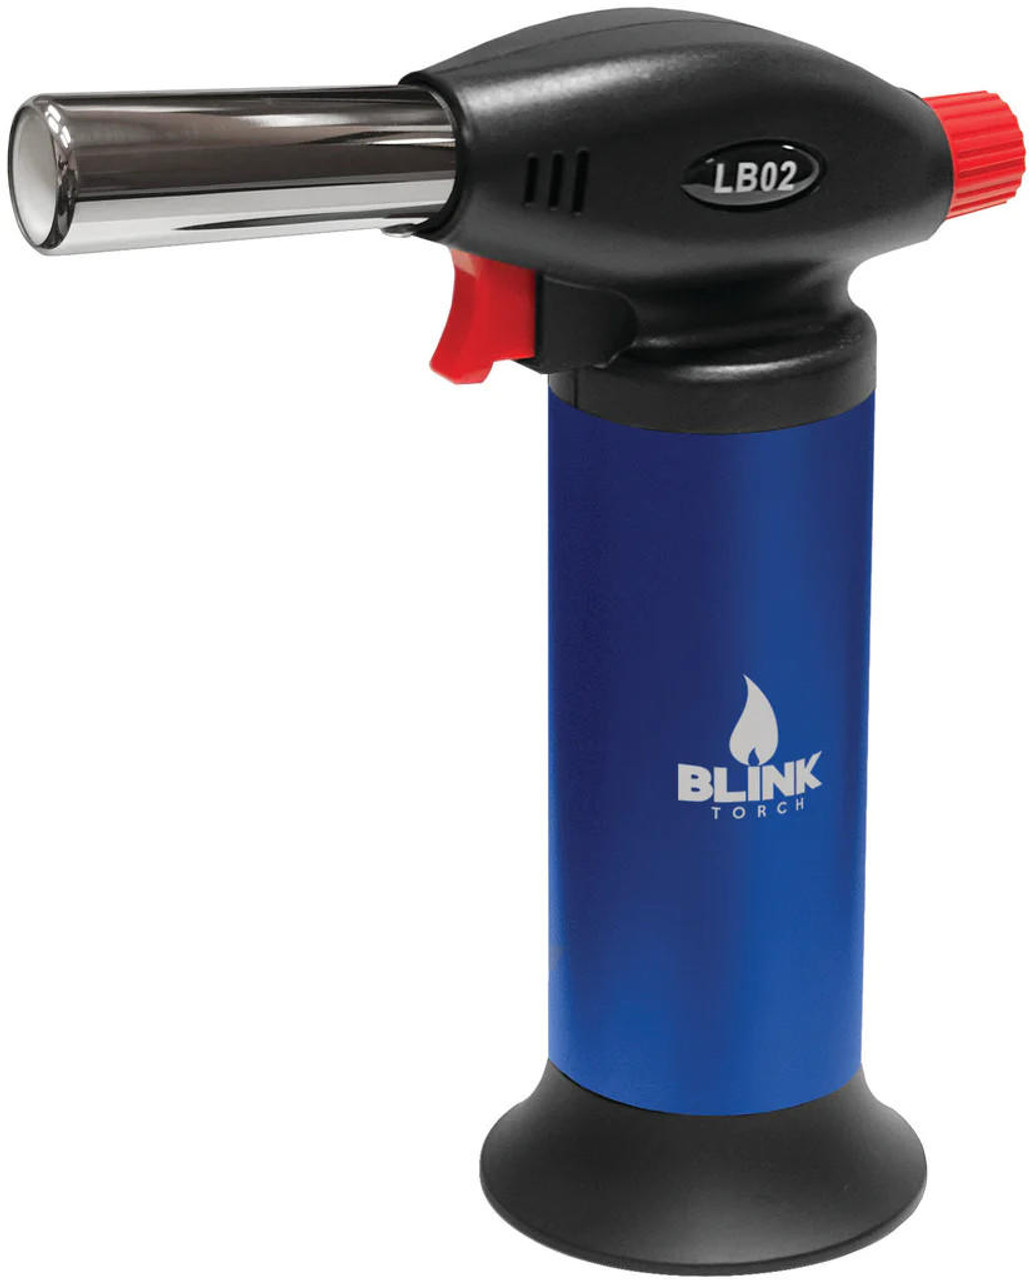  Blink Torch Lighter LB02  at The Cloud Supply